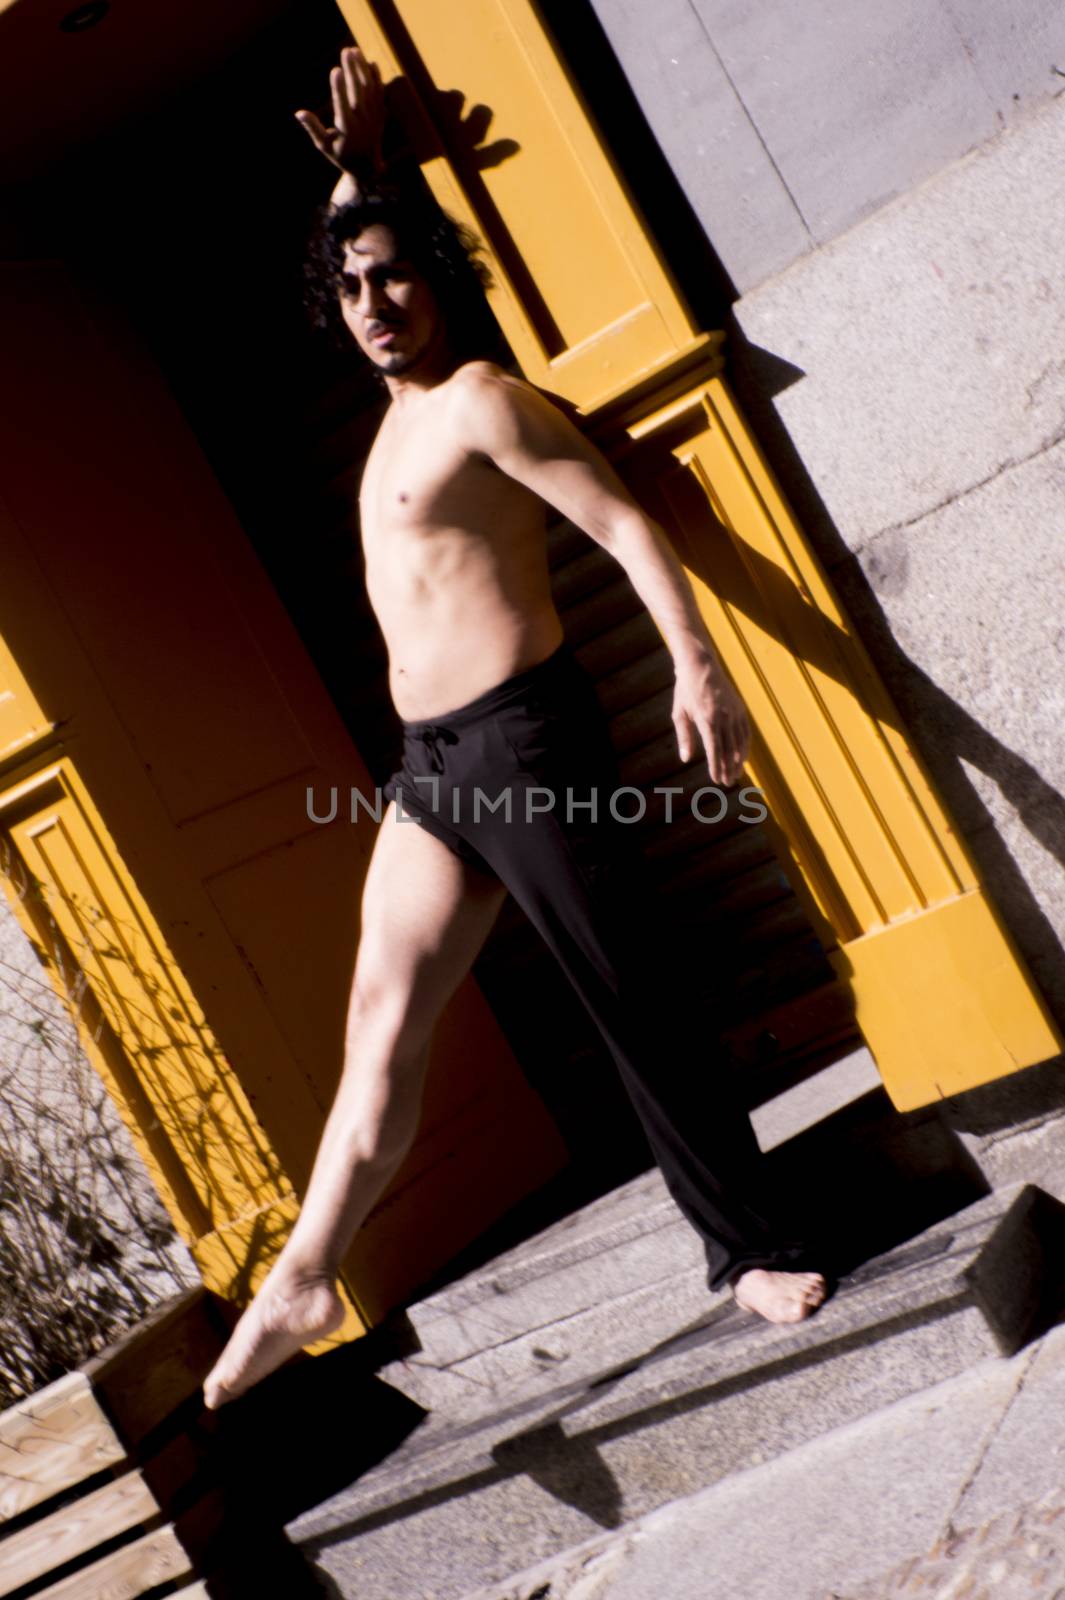 Latin male dancer posing with dancing figures by GemaIbarra